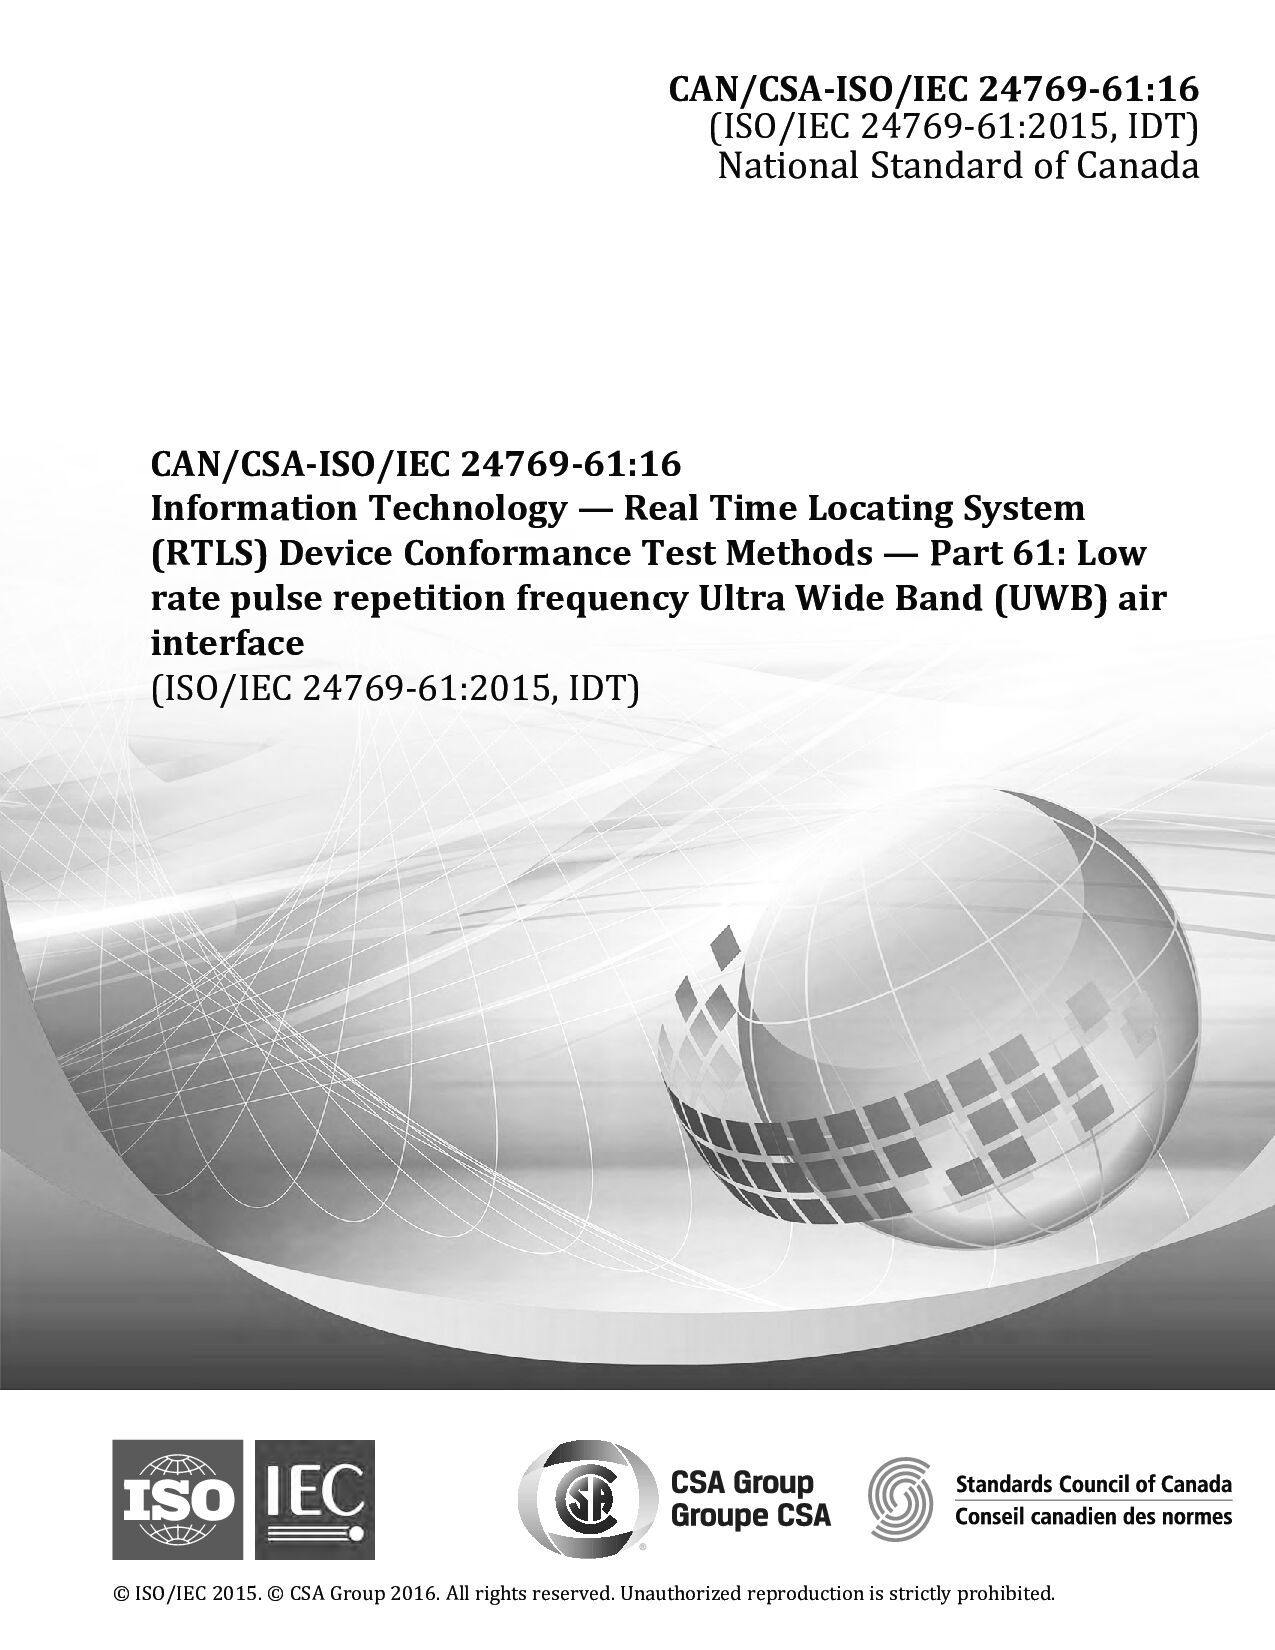 CAN/CSA-ISO/IEC 24769-61:2016